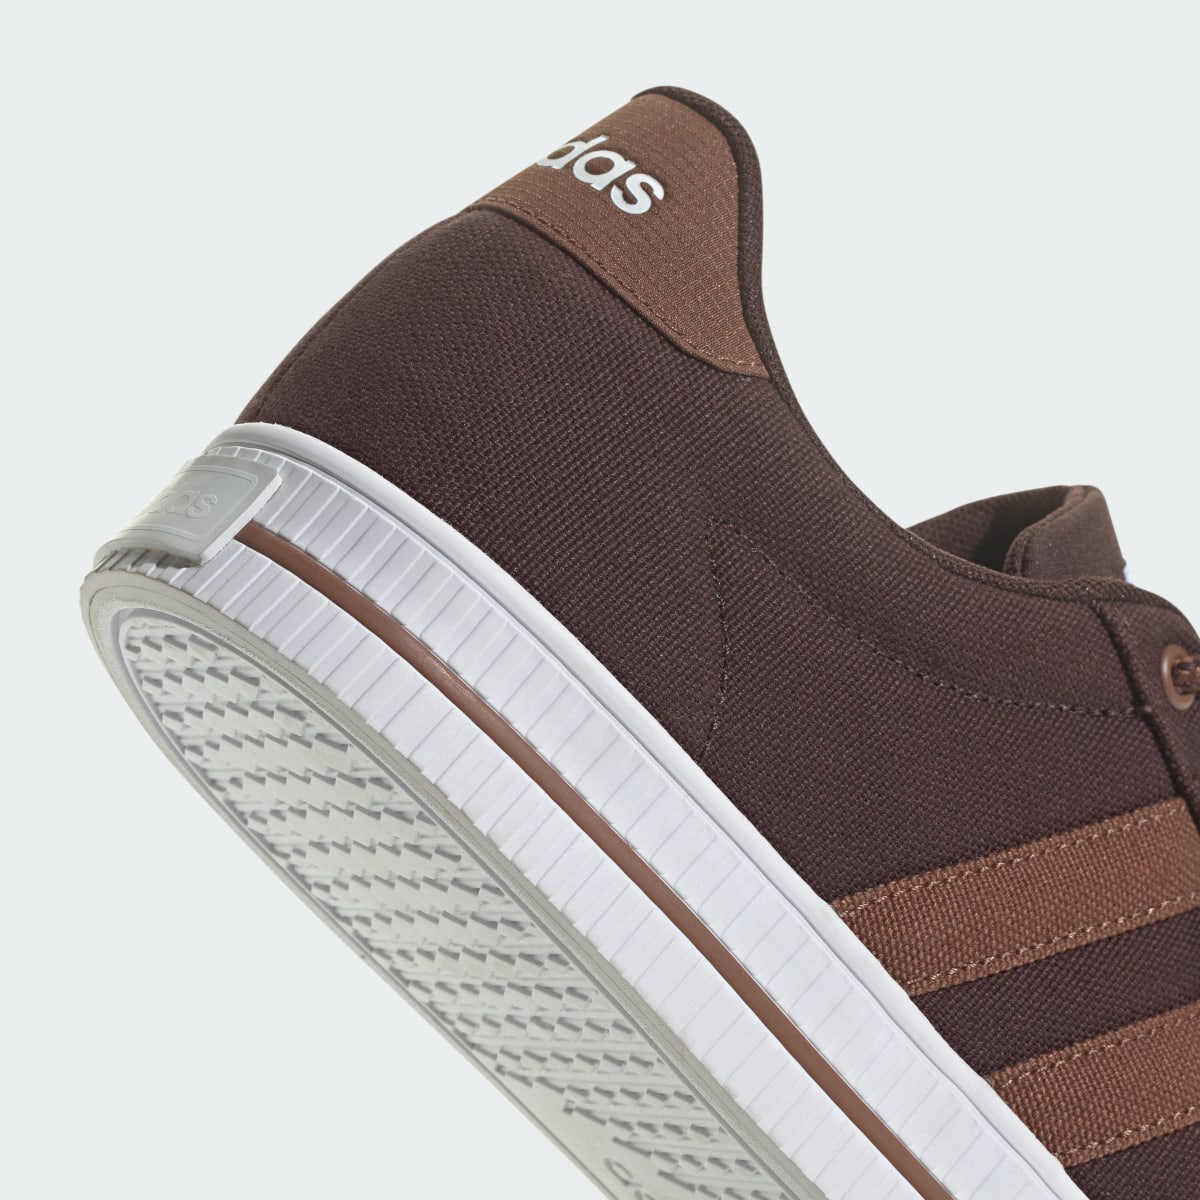 Adidas Daily 3.0 Shoes. 9